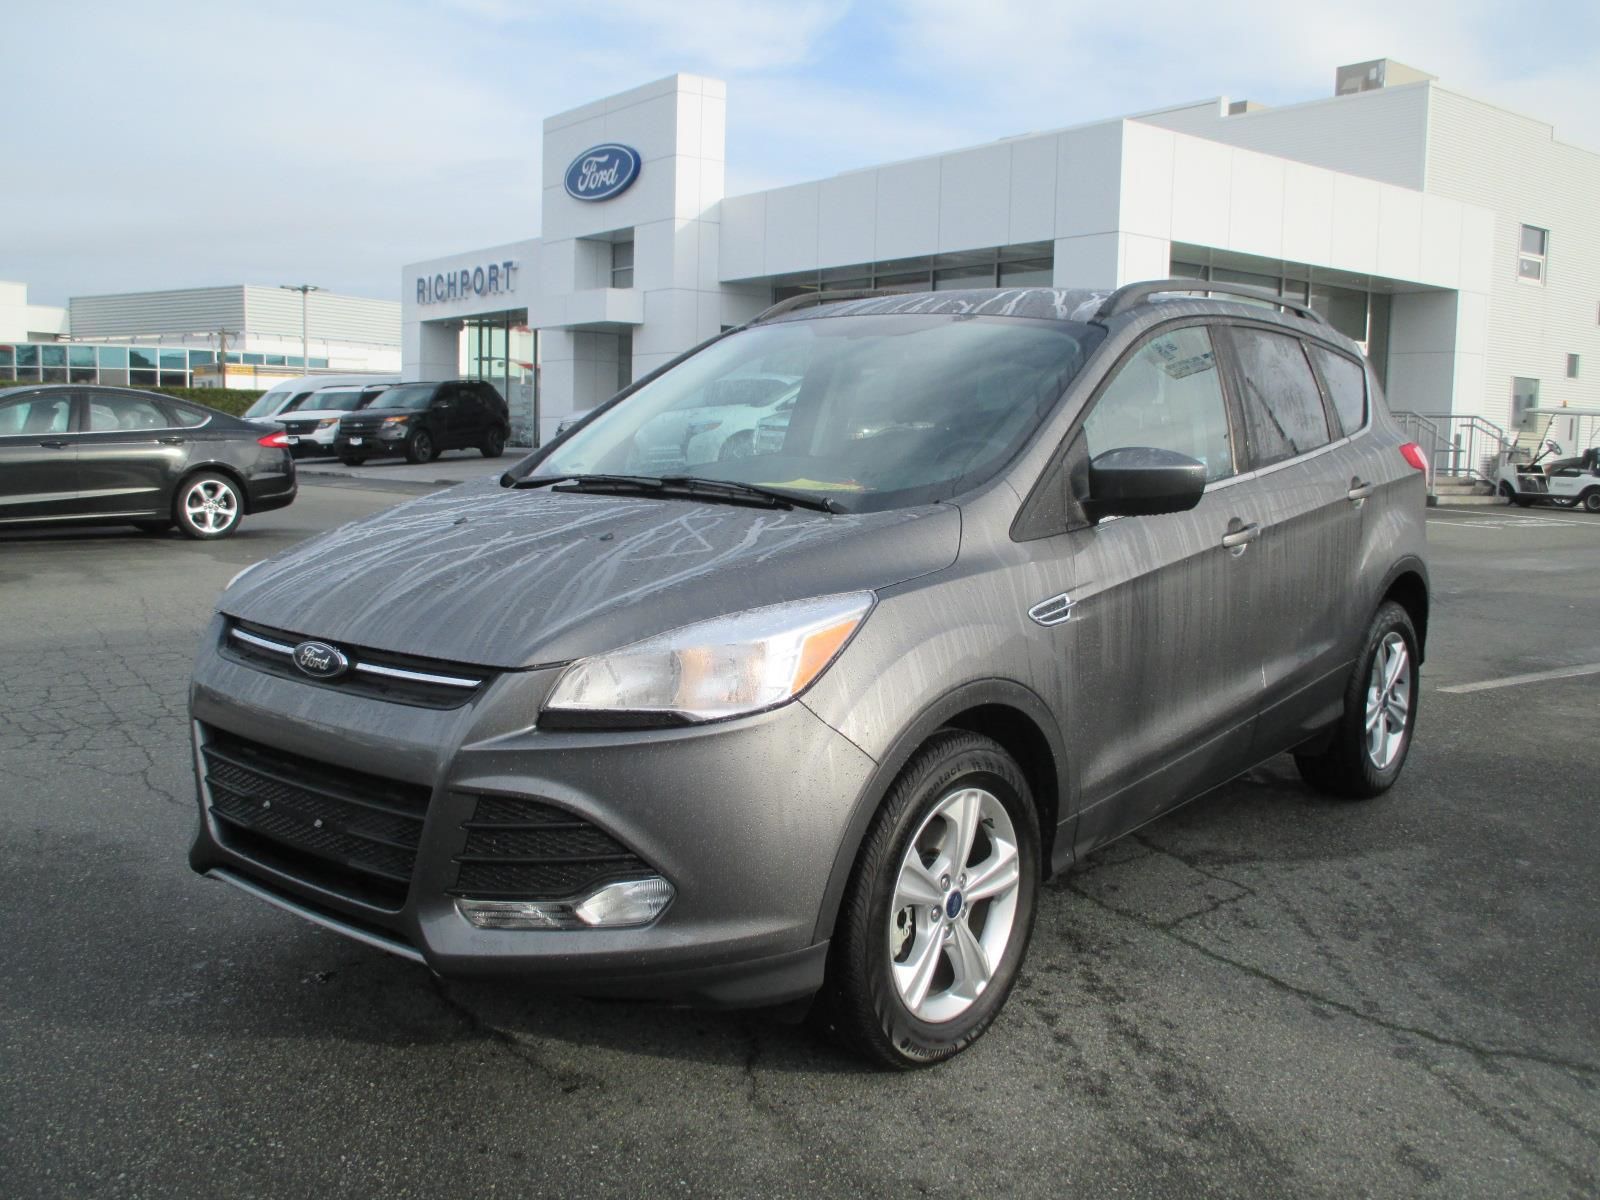 Richport ford used vehicles #8